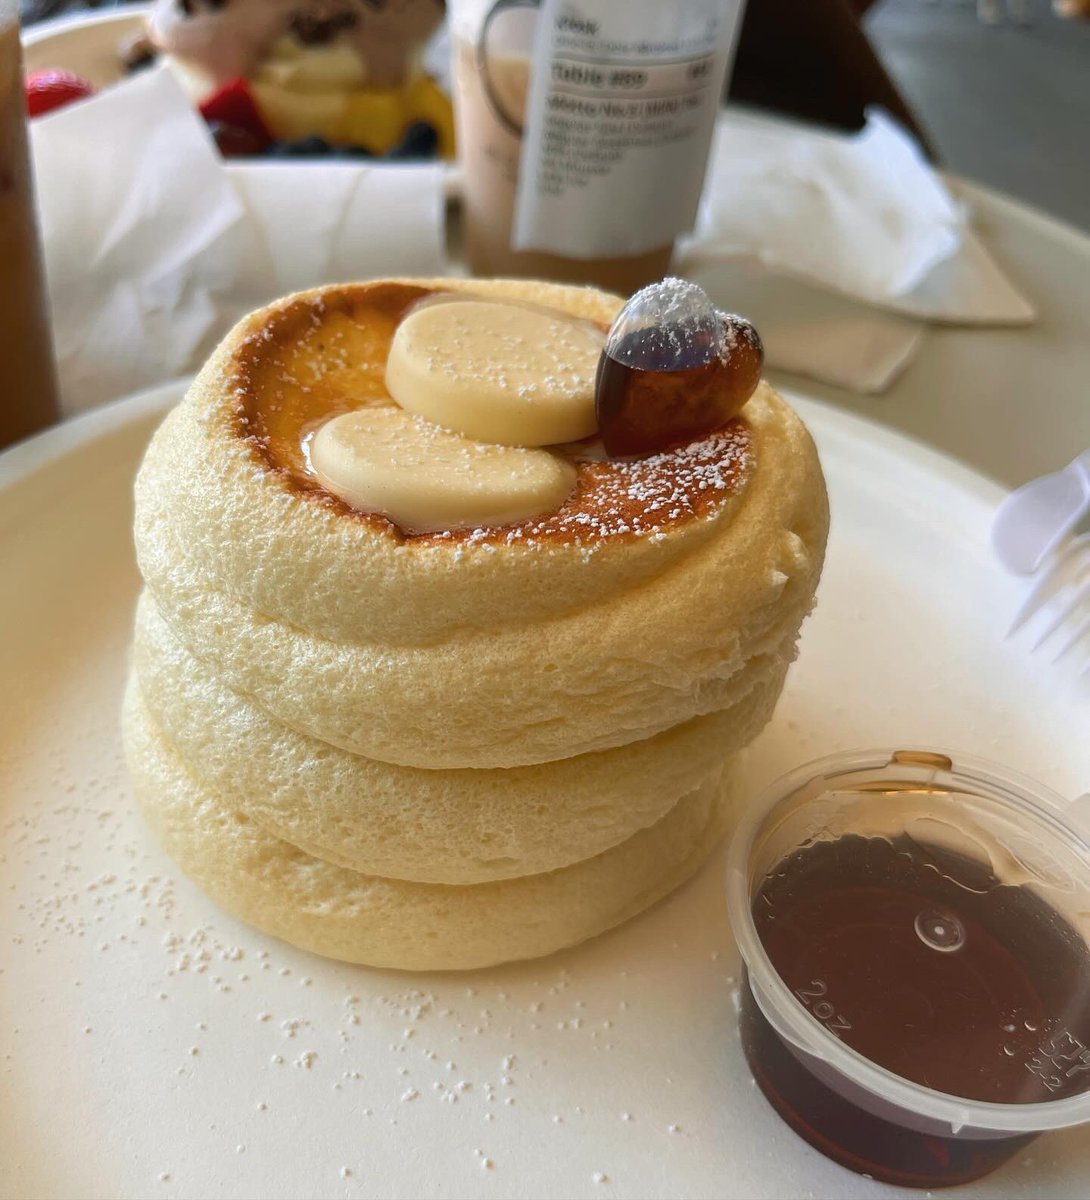 Had some THICC motherfucking pancakes today 🥵